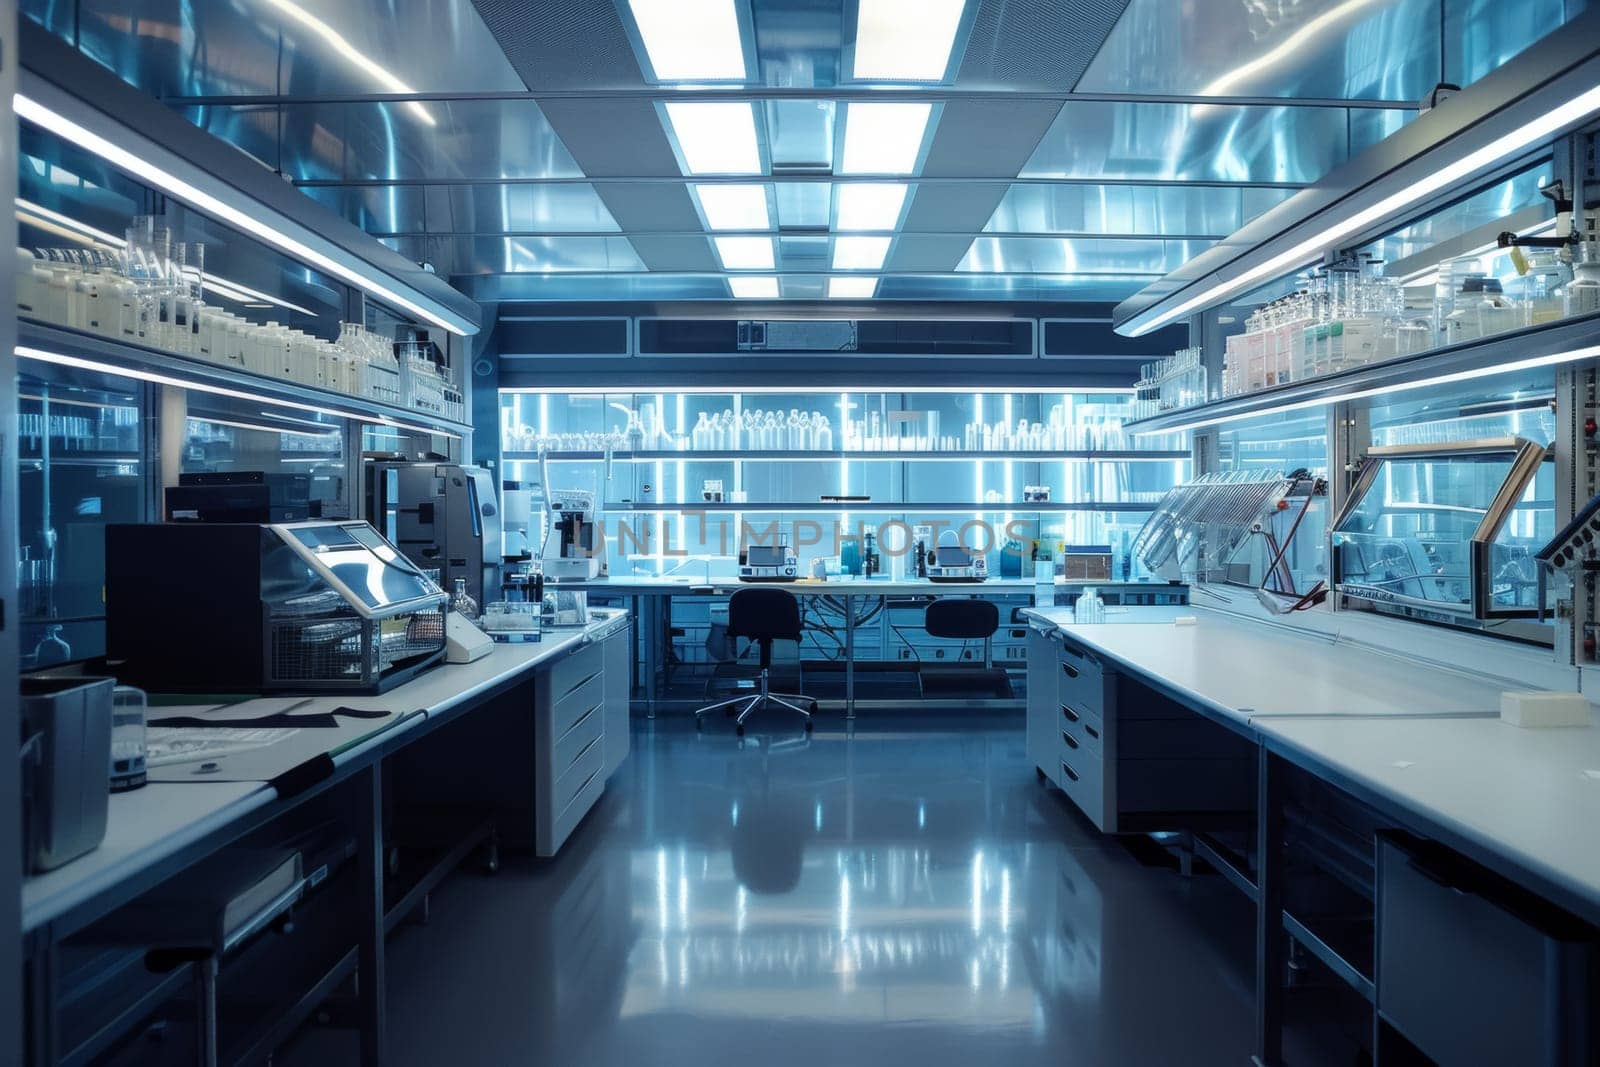 The interior of a state-of-the-art laboratory, highlighting the pristine conditions and advanced equipment for research